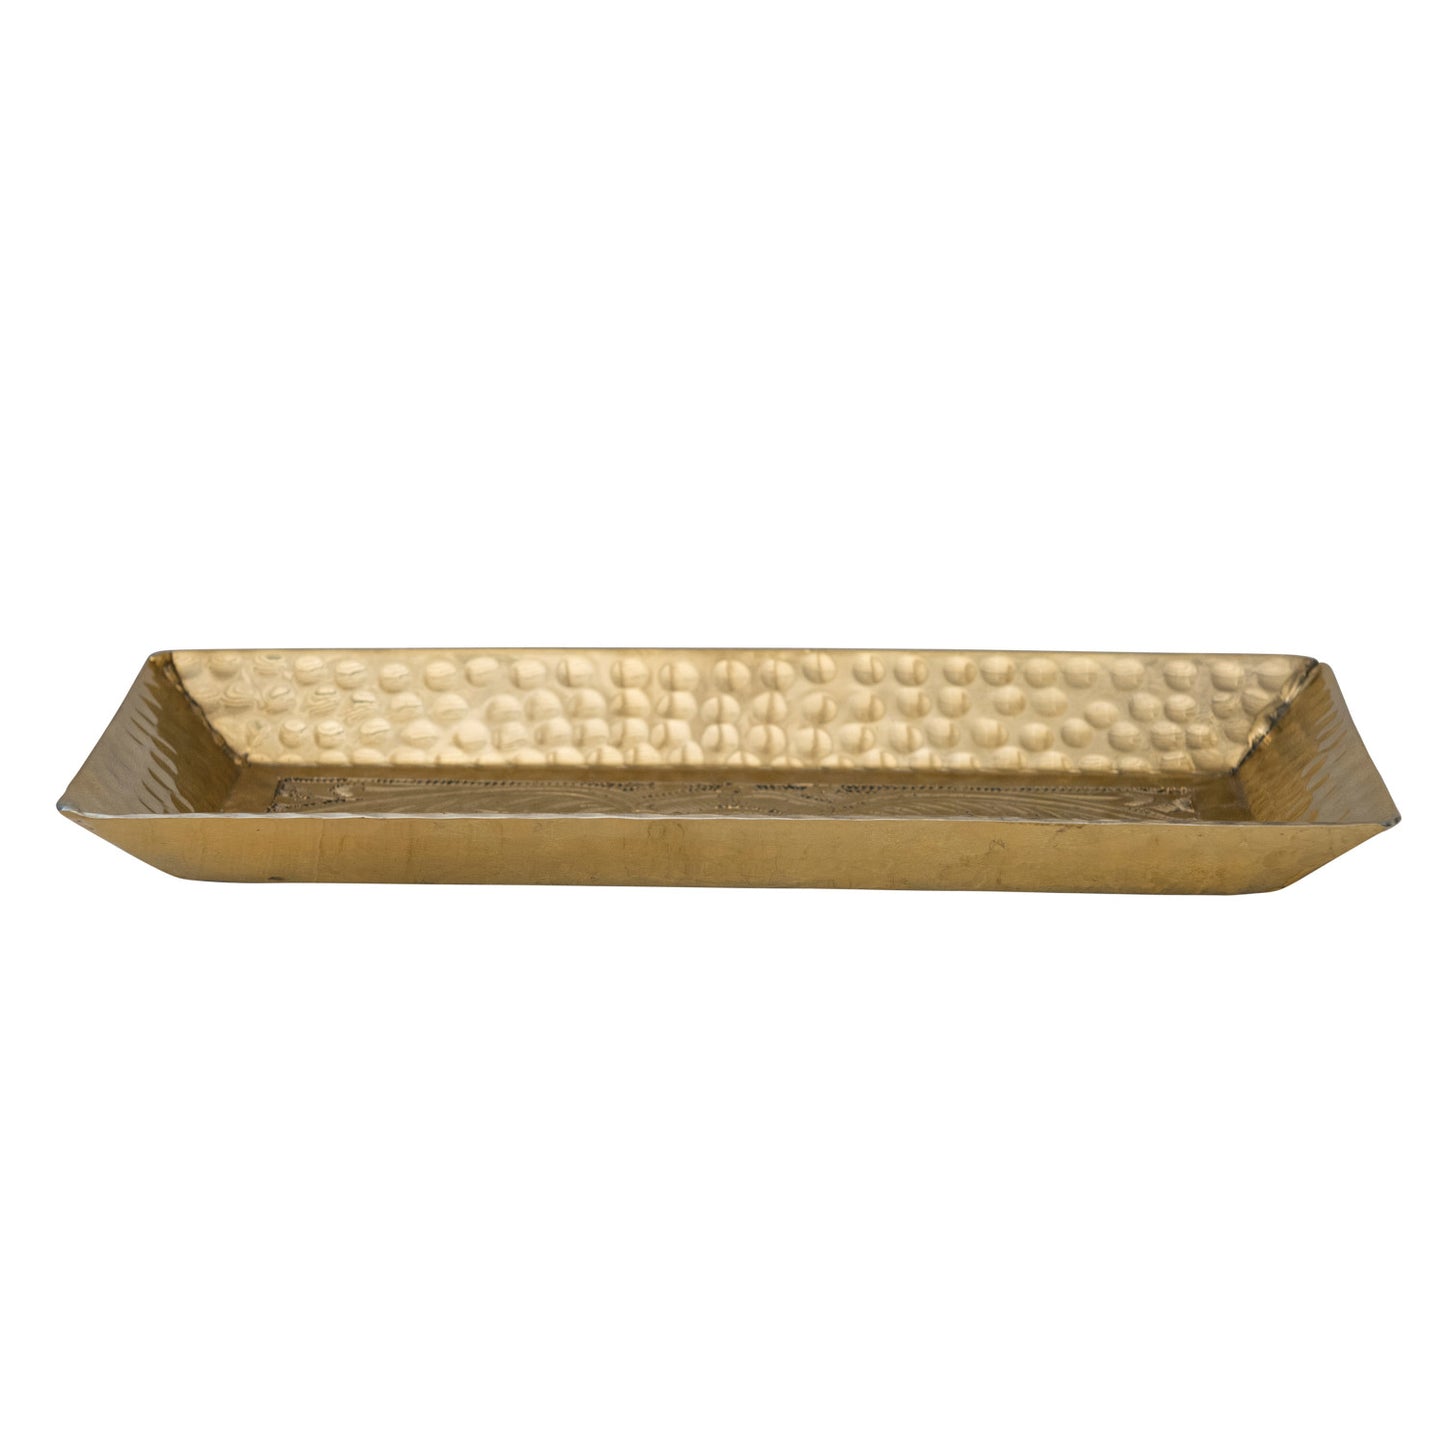 Decorative Hammered Aluminum Tray With Stamped Design, Gold Finish